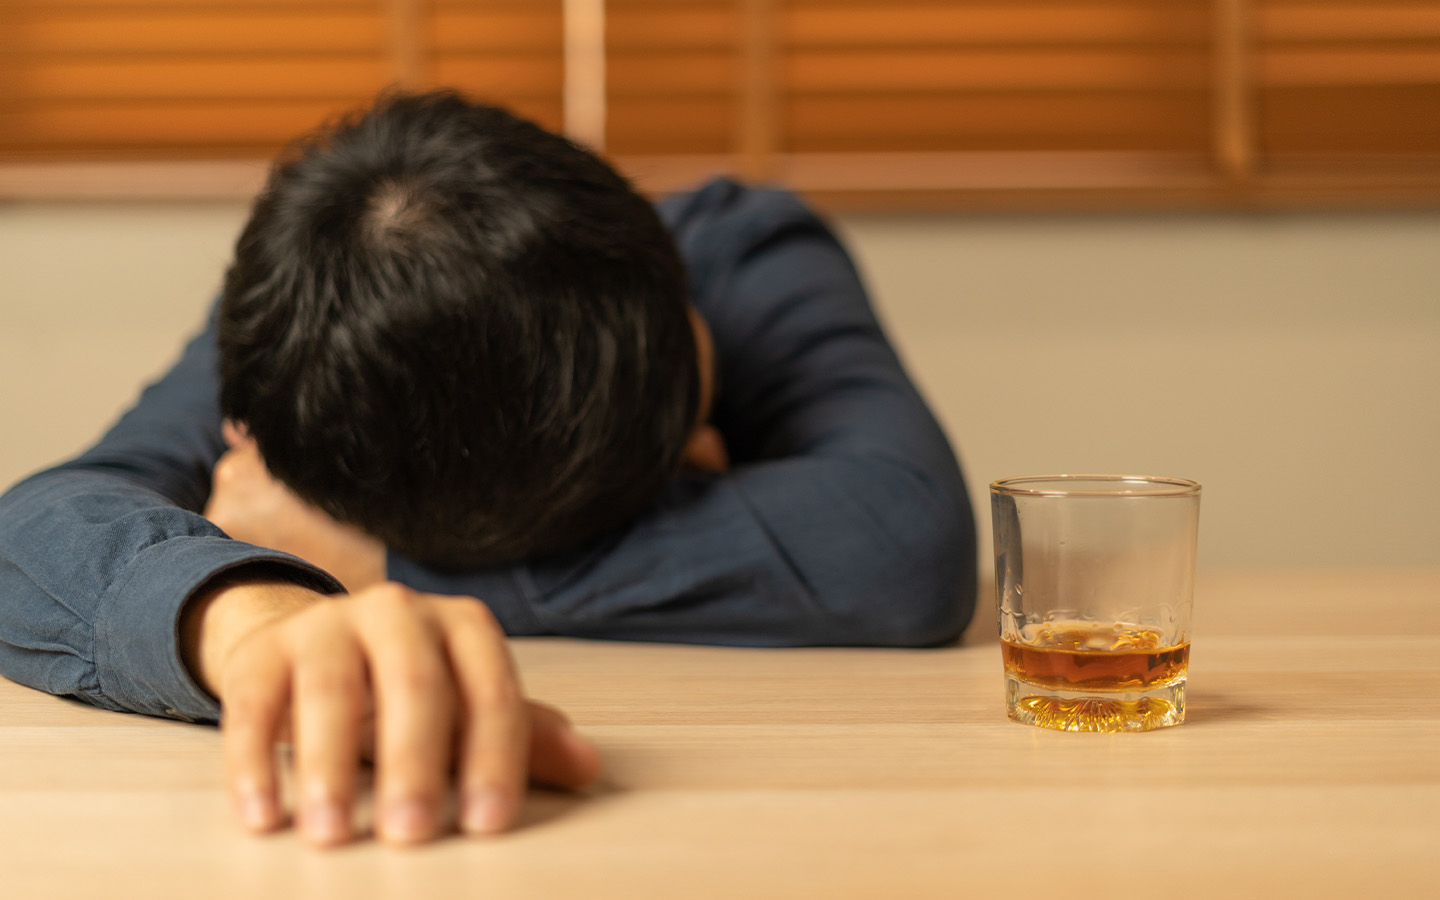 Scientists have made a breakthrough in the quest to combat hangovers